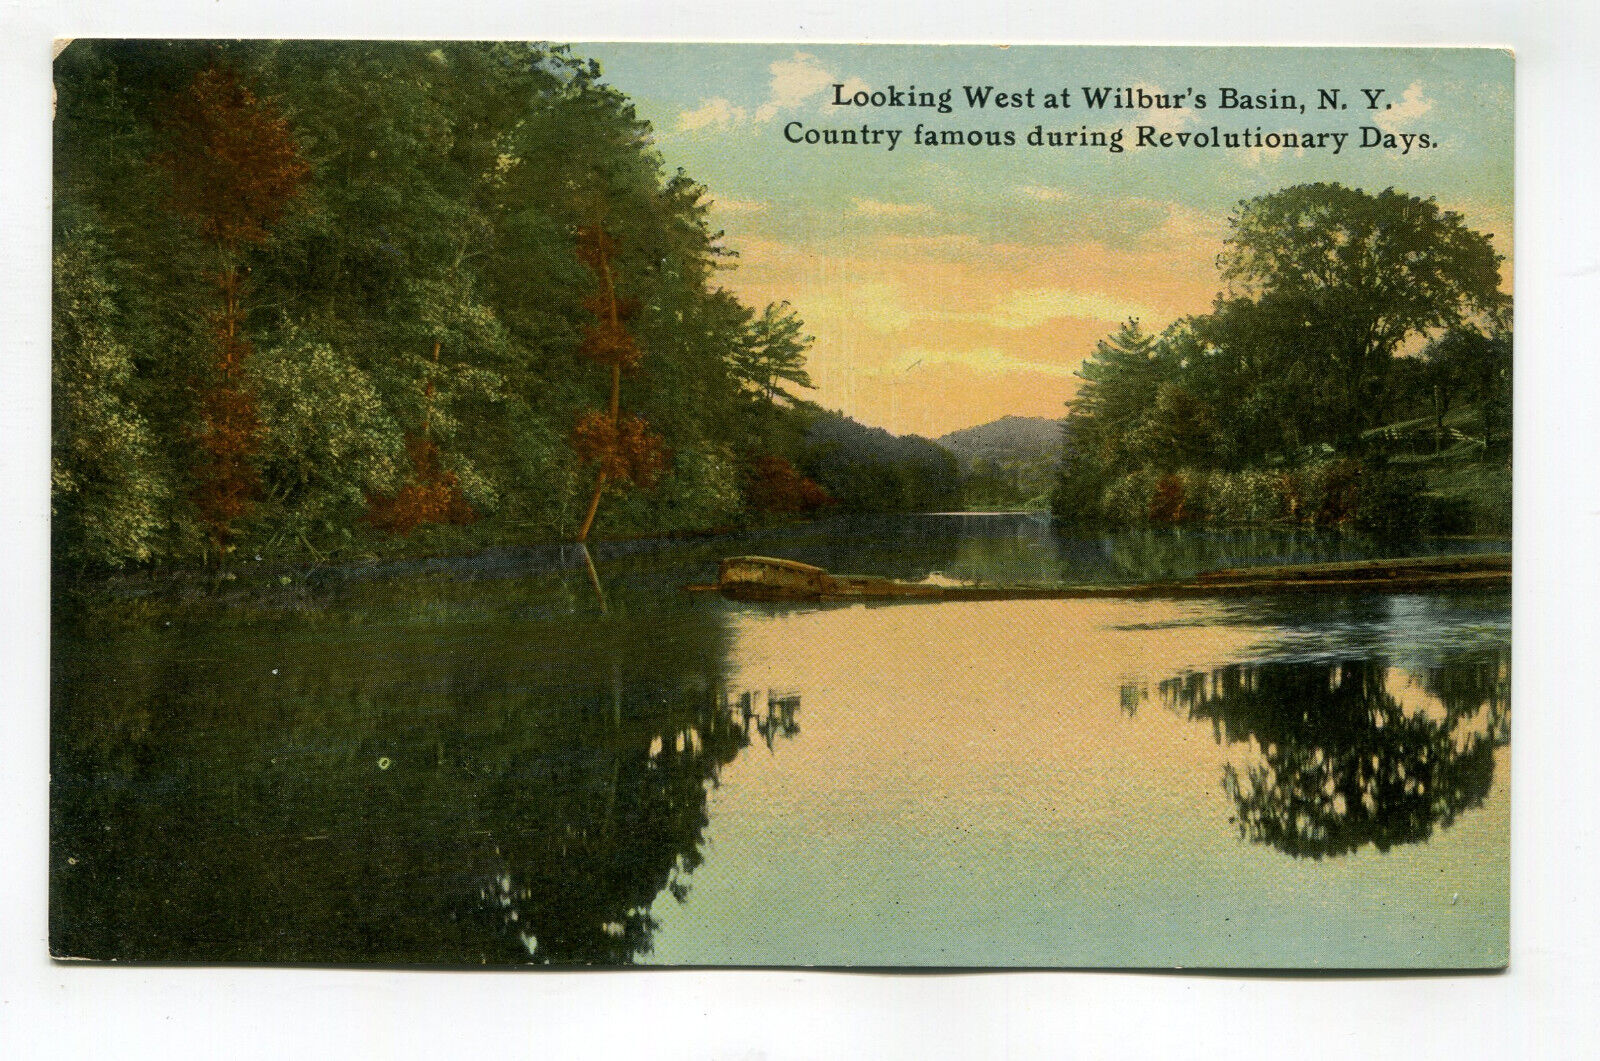 LOOKING WEST AT WILBURS BASIN NY COUNTRY FAMOUS DURING REVOLUTIONARY DAYS